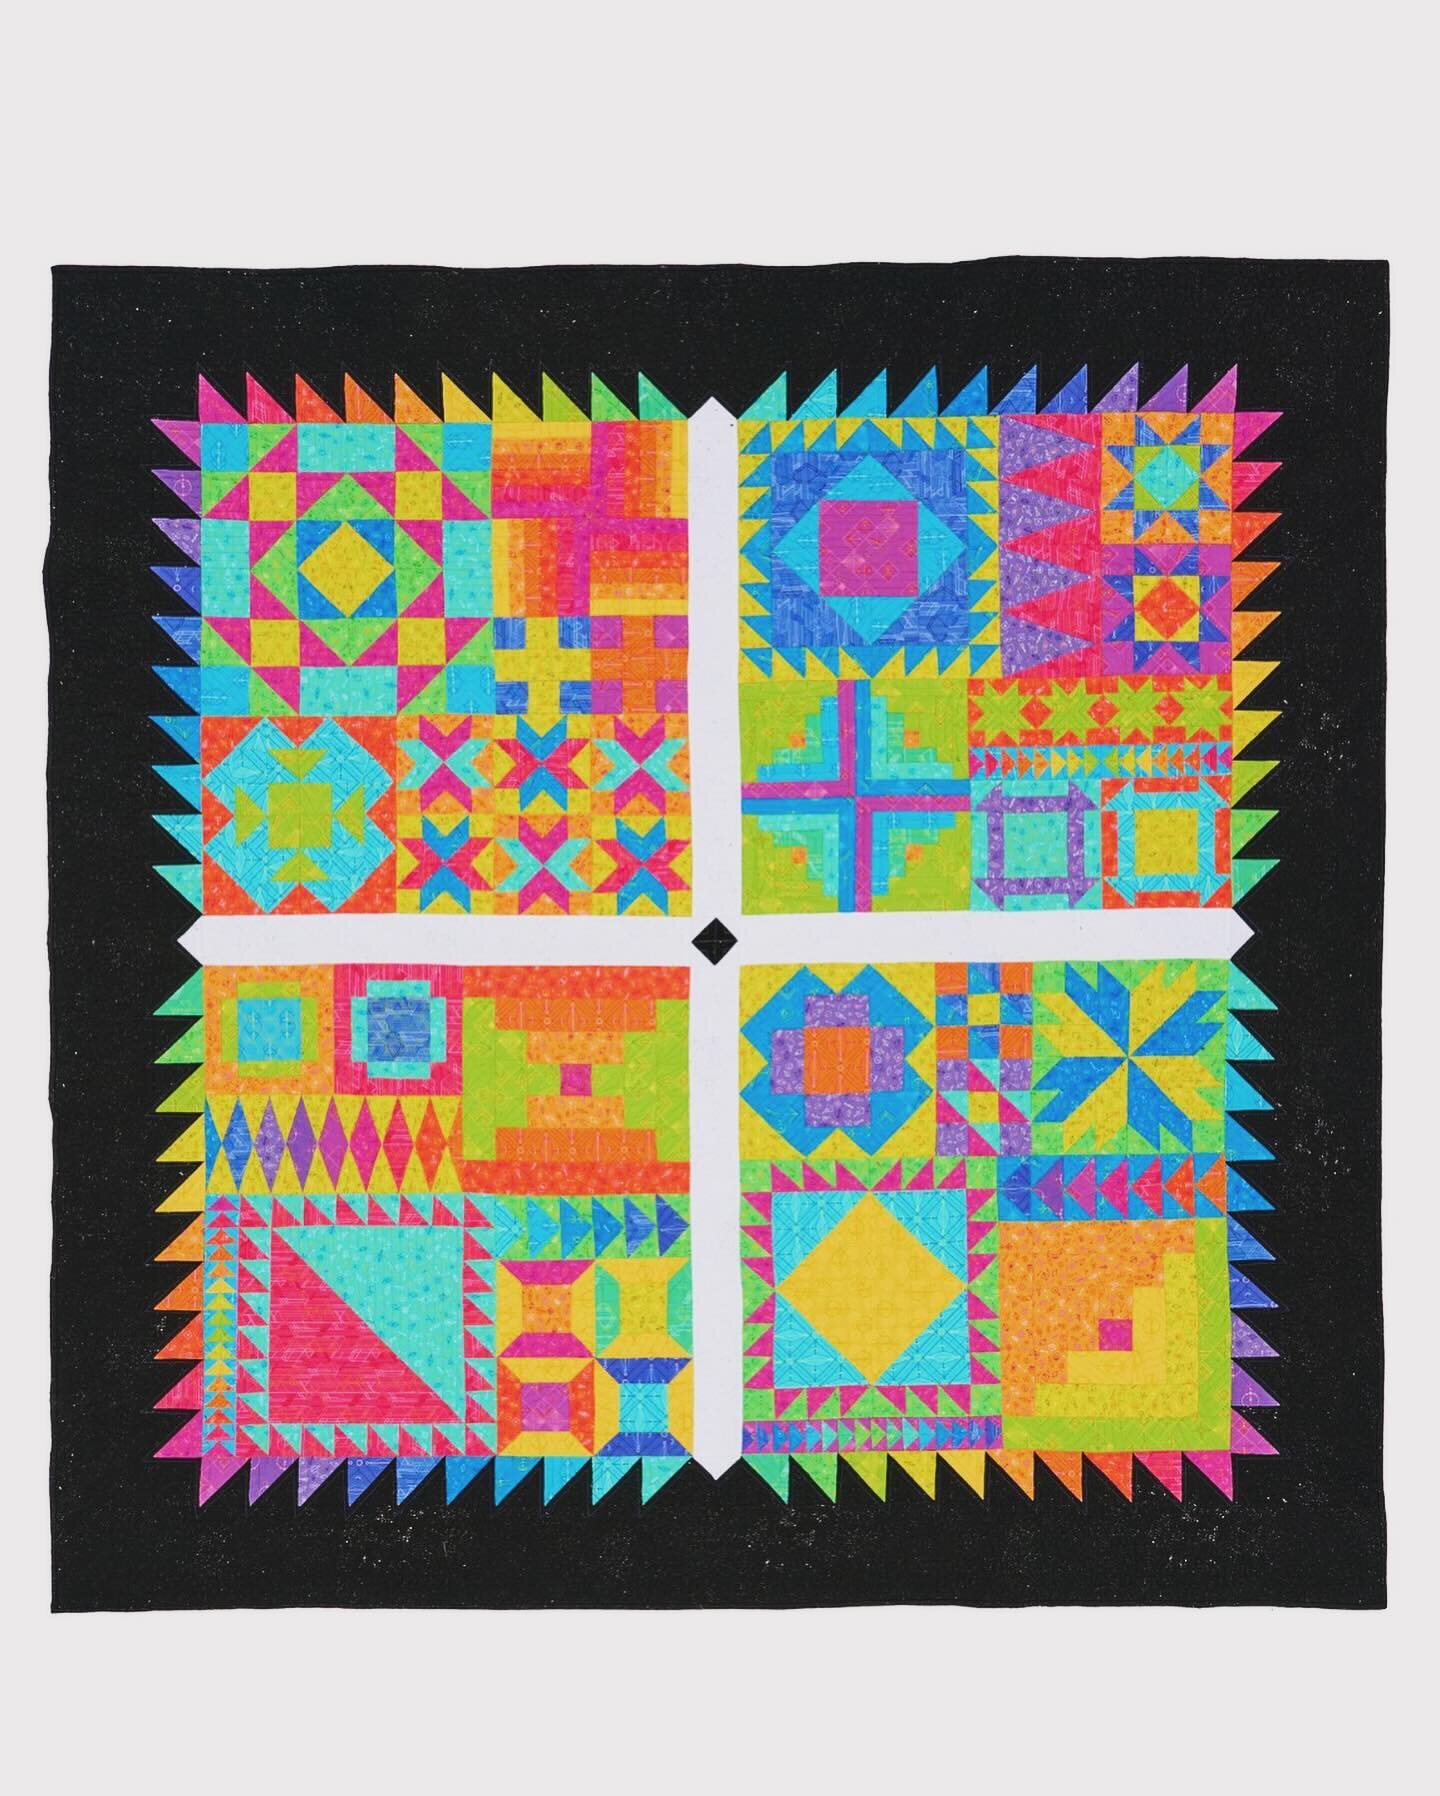 Thank you so much to everyone who purchased Bear Claw yesterday! So happy that it&rsquo;s finally out in the world. I&rsquo;ll be sharing more versions of the quilt with other fabric collections in the near future so you can see it done up in other w